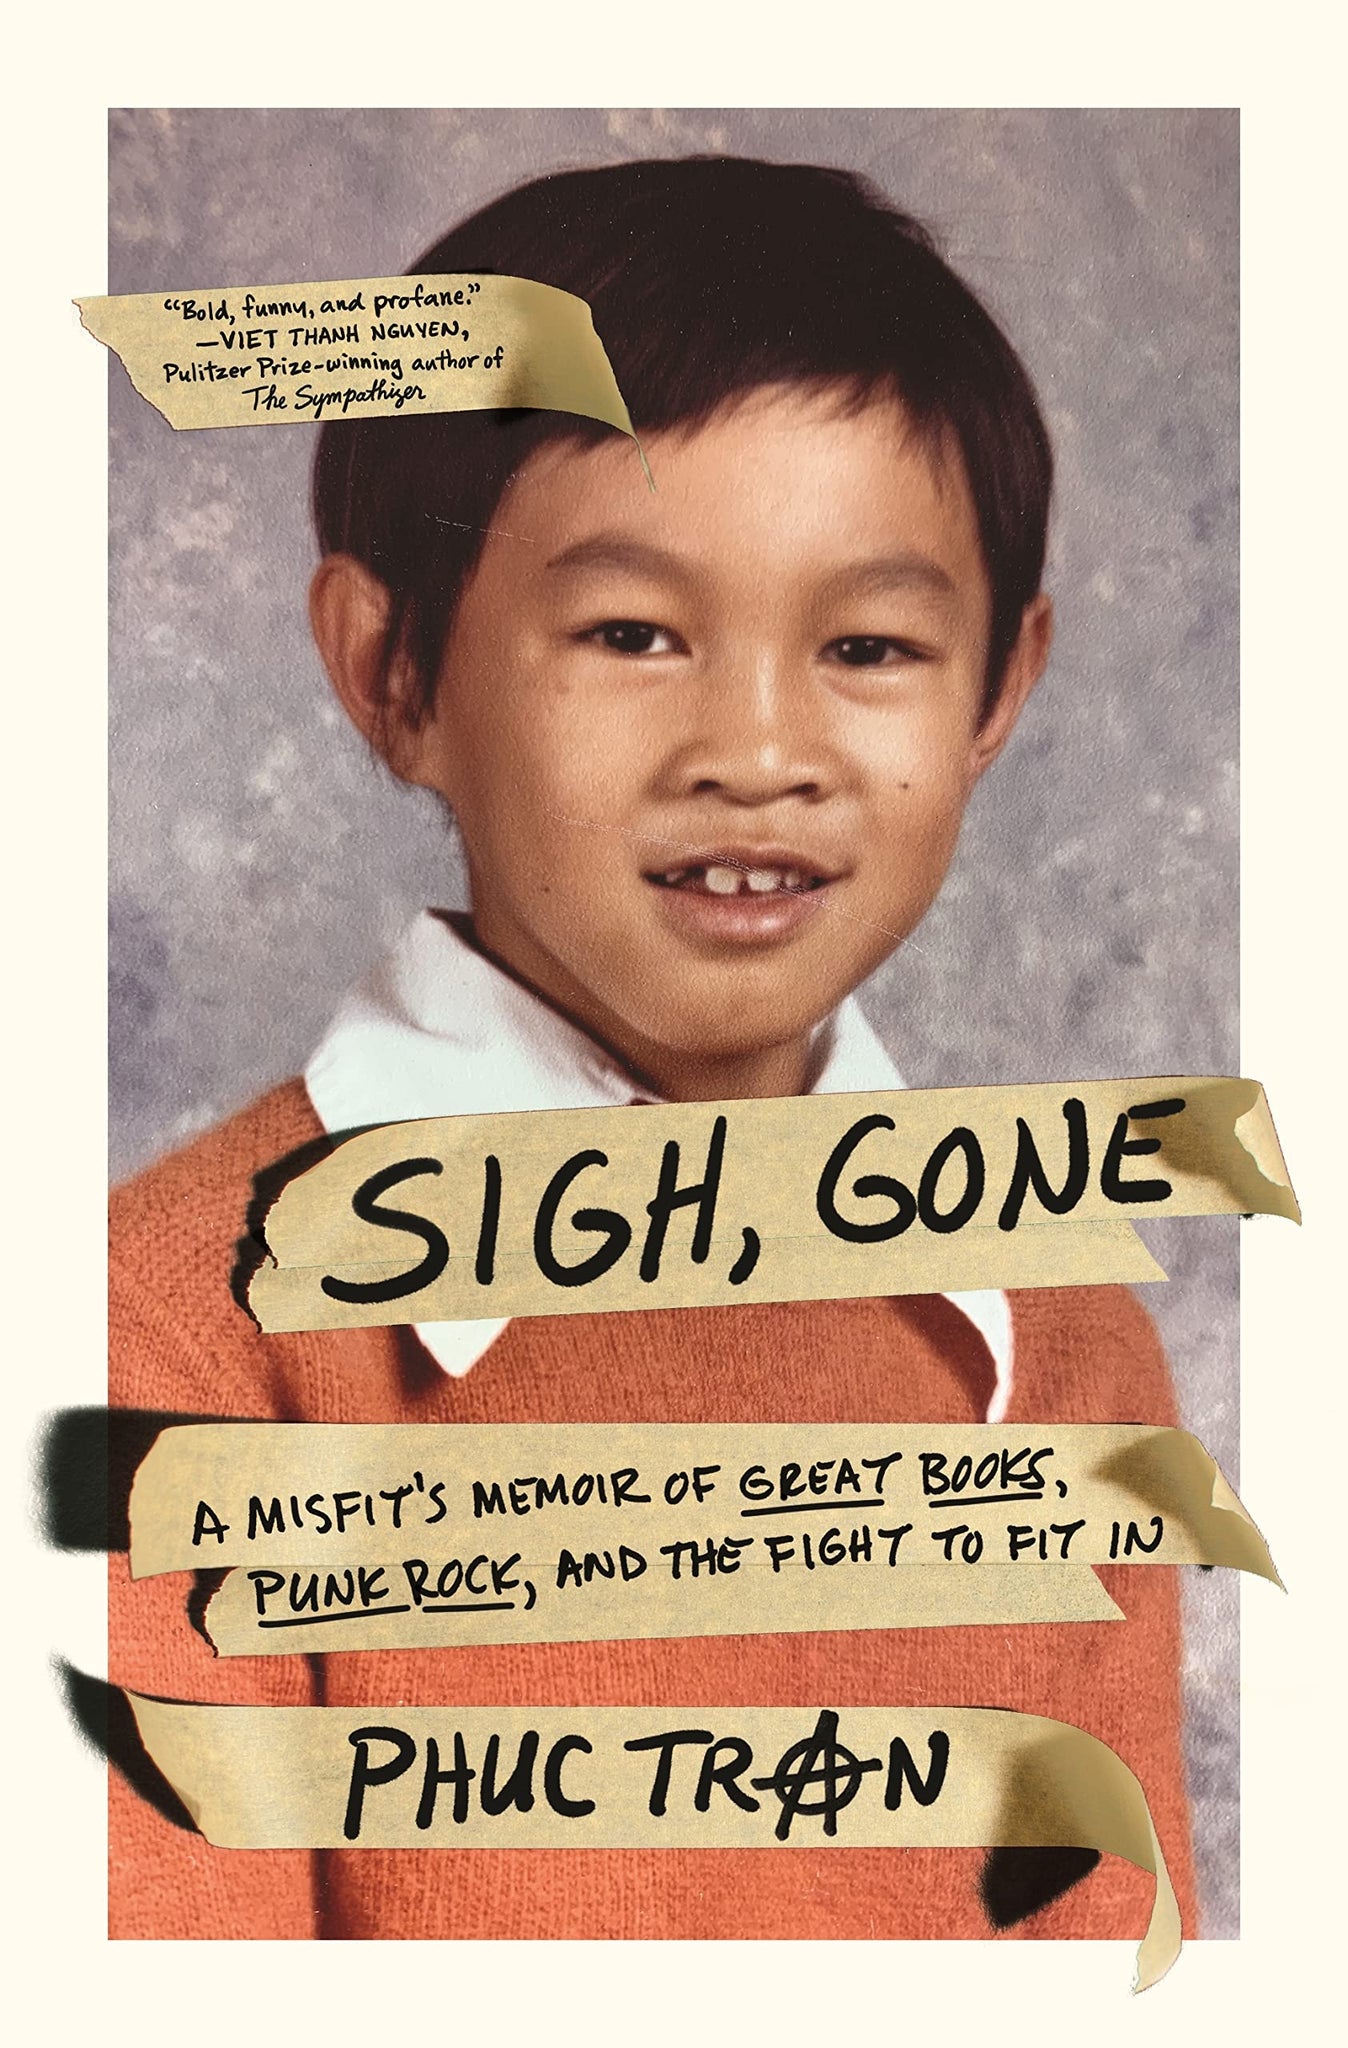 Sigh, Gone: A Misfit's Memoir of Great Books, Punk Rock & the Fight to Fit in by Phuc Tran - tpbk